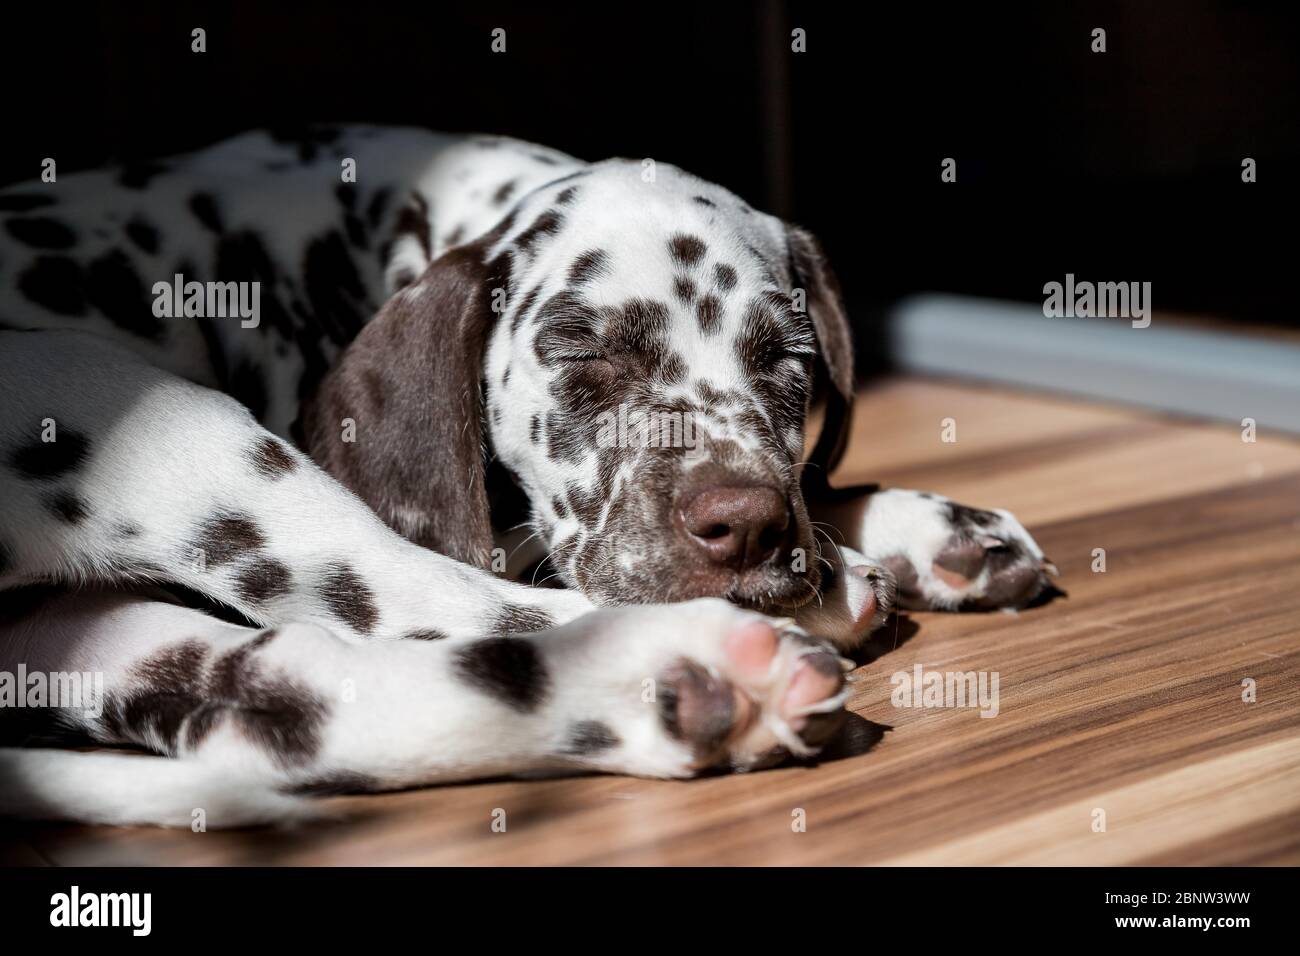 Black Brown White Dog High Resolution Stock Photography and Images - Alamy